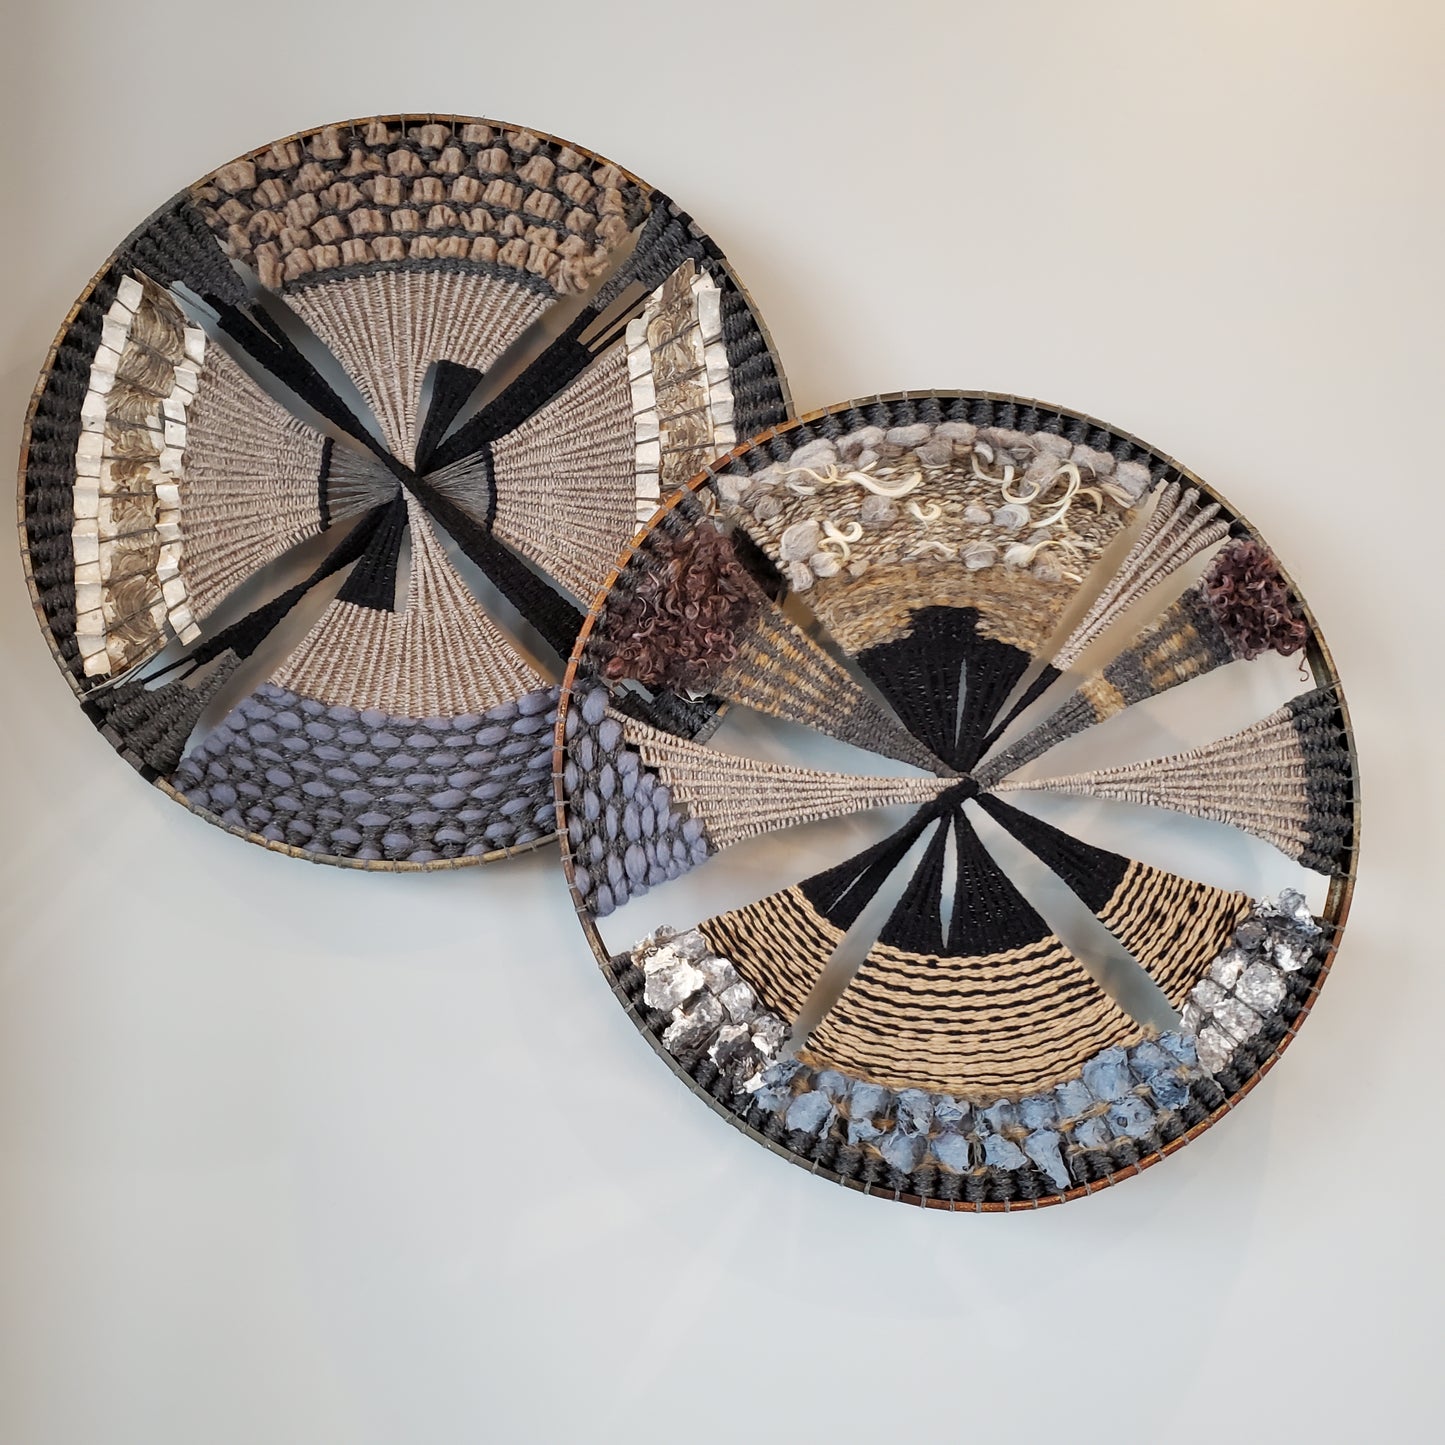 Handwoven Mandala Barrel Rim sculpture | Art Galleries in Door County | SOLD,  Available for Commissioned Work